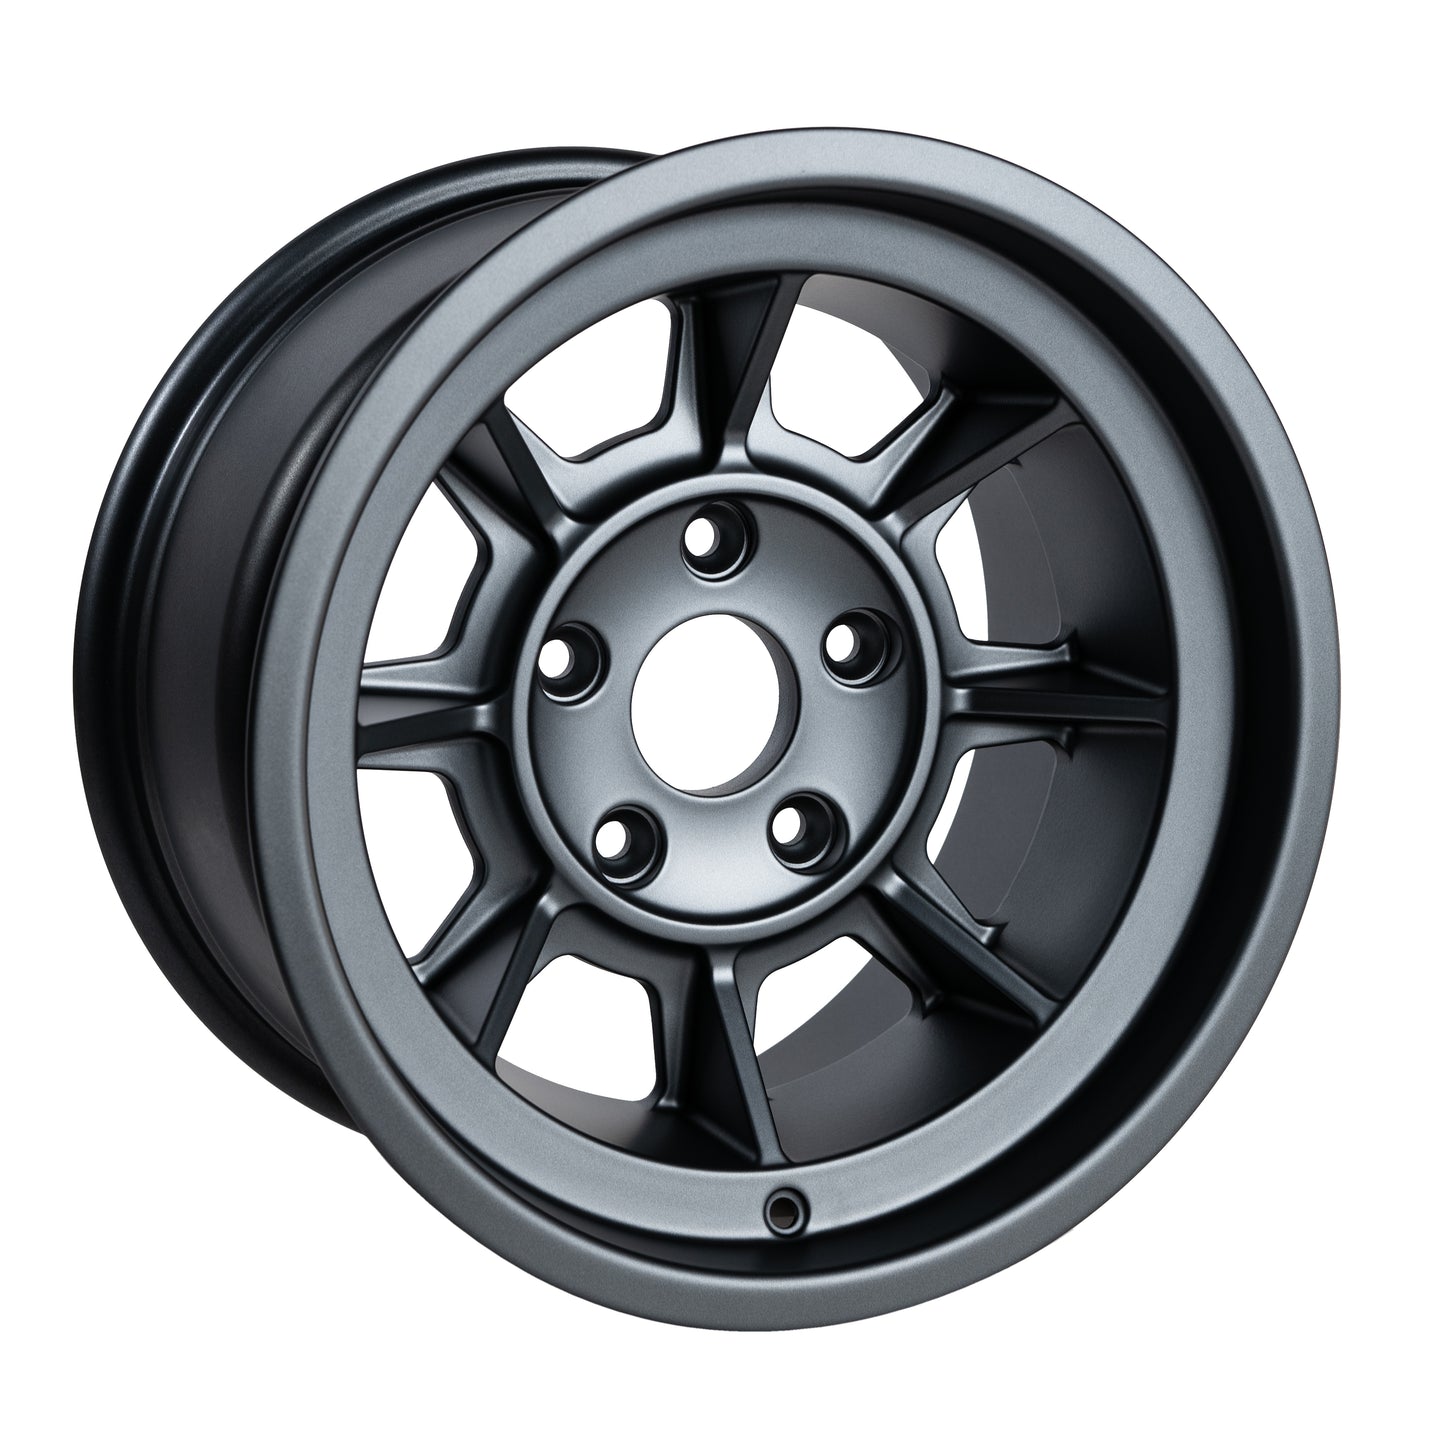 PAG1690 Satin Anthracite 16 x 9" Alloy Wheels - Sierra Madre Collection